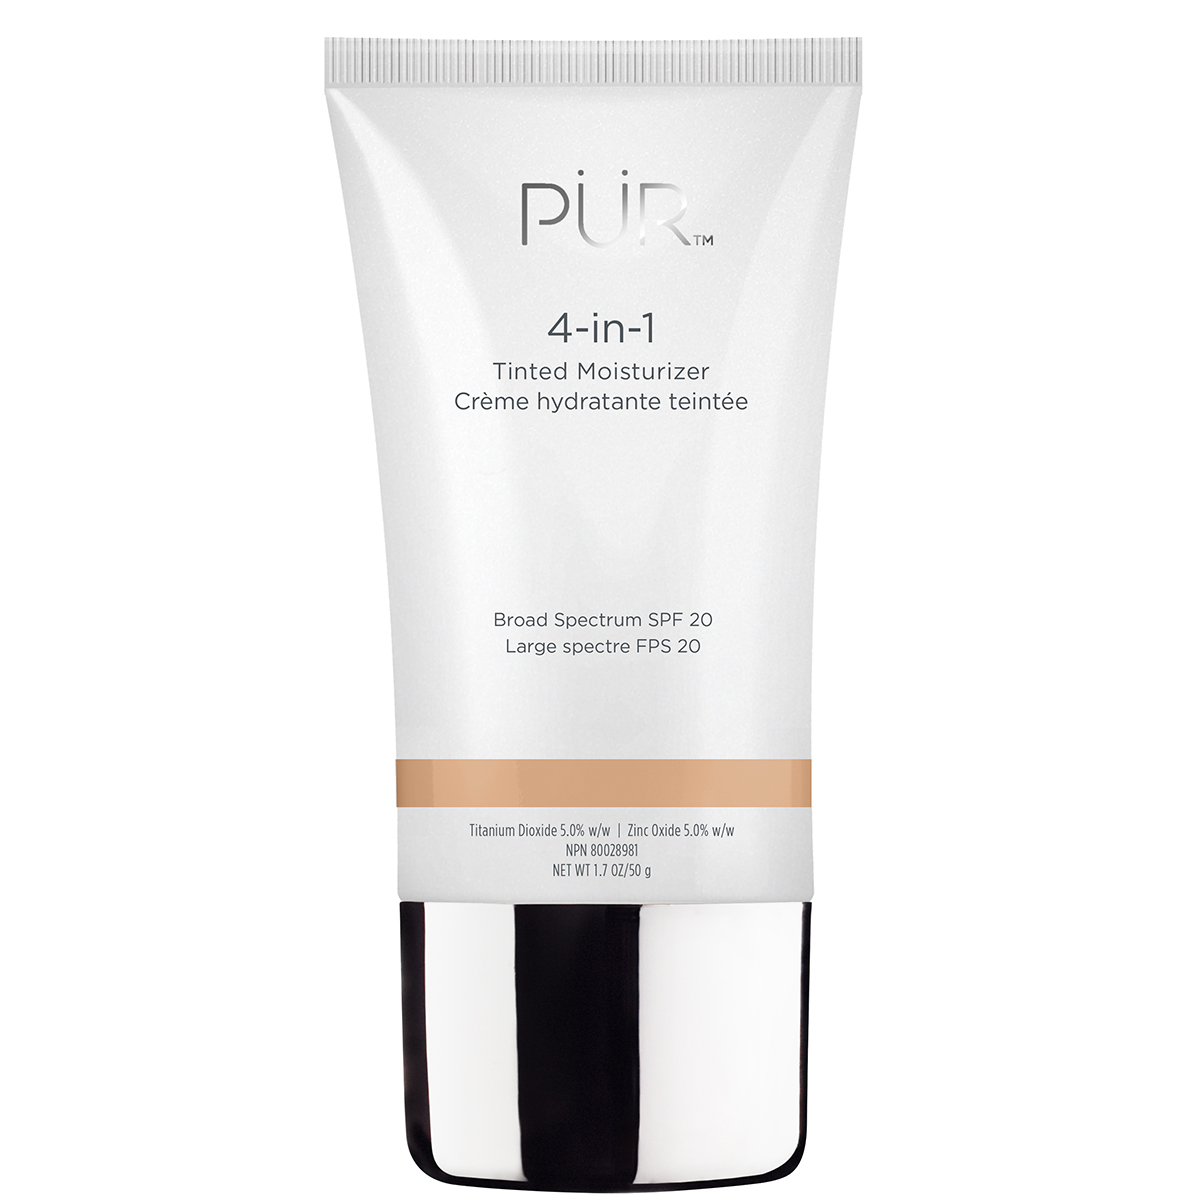 Pur 4-in-1 Mineral Tinted Moisturizer Light LG3